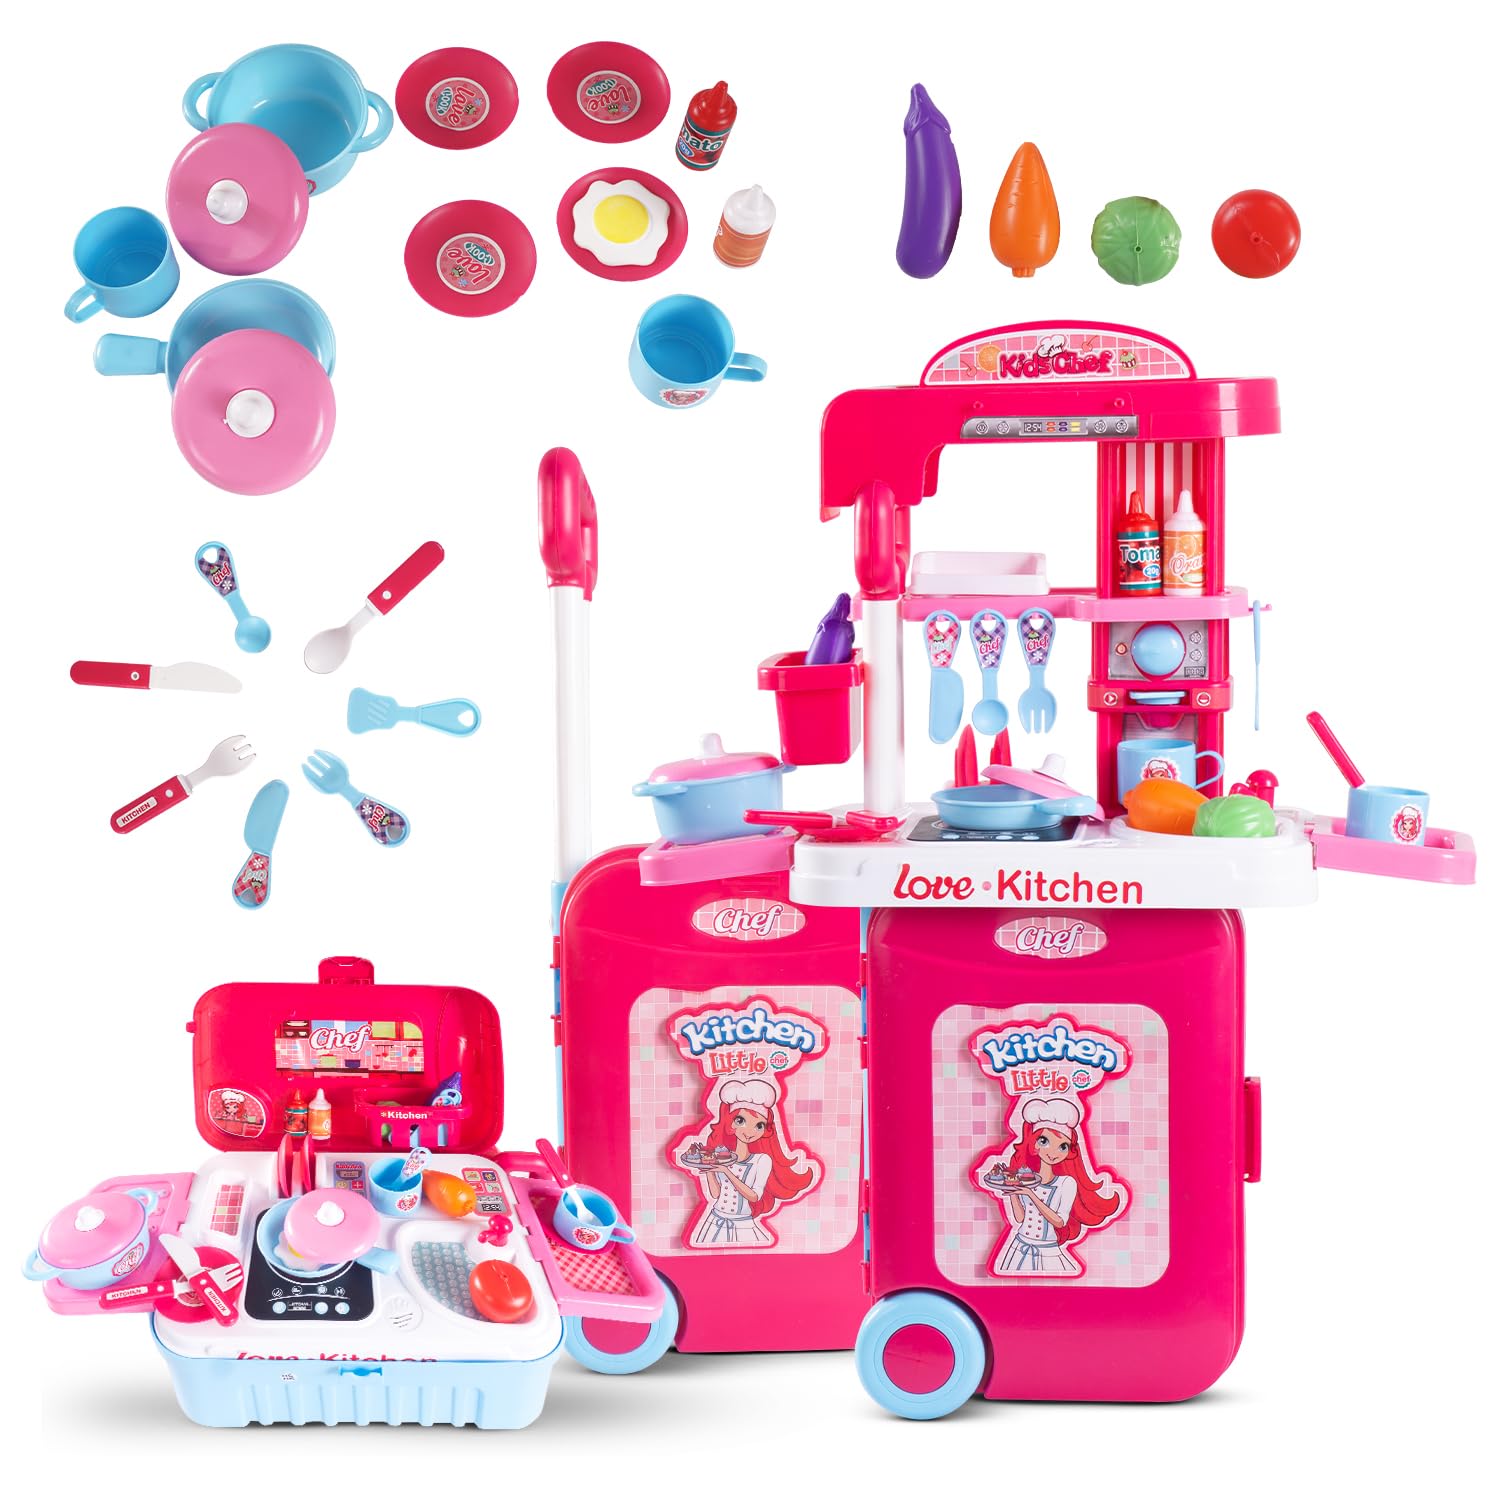 Baybee 2 in 1 Kitchen Set for Kids, Portable Pretend Play Little Chef Set Toys